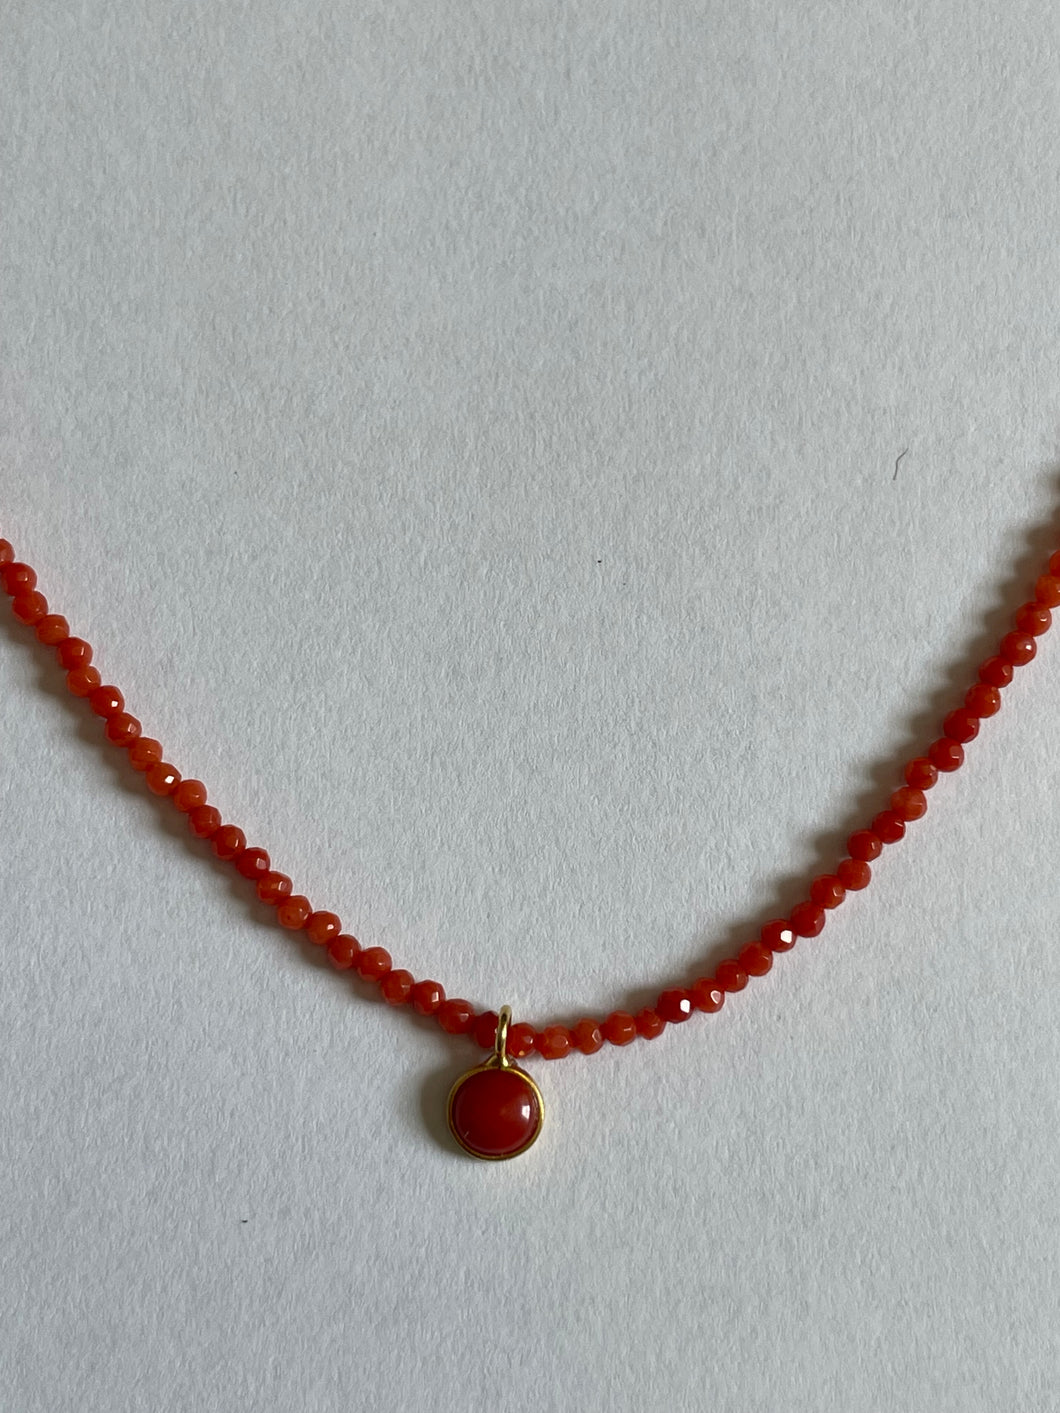 Micro Faceted Coral Bead Necklace with Coral Drop - 16